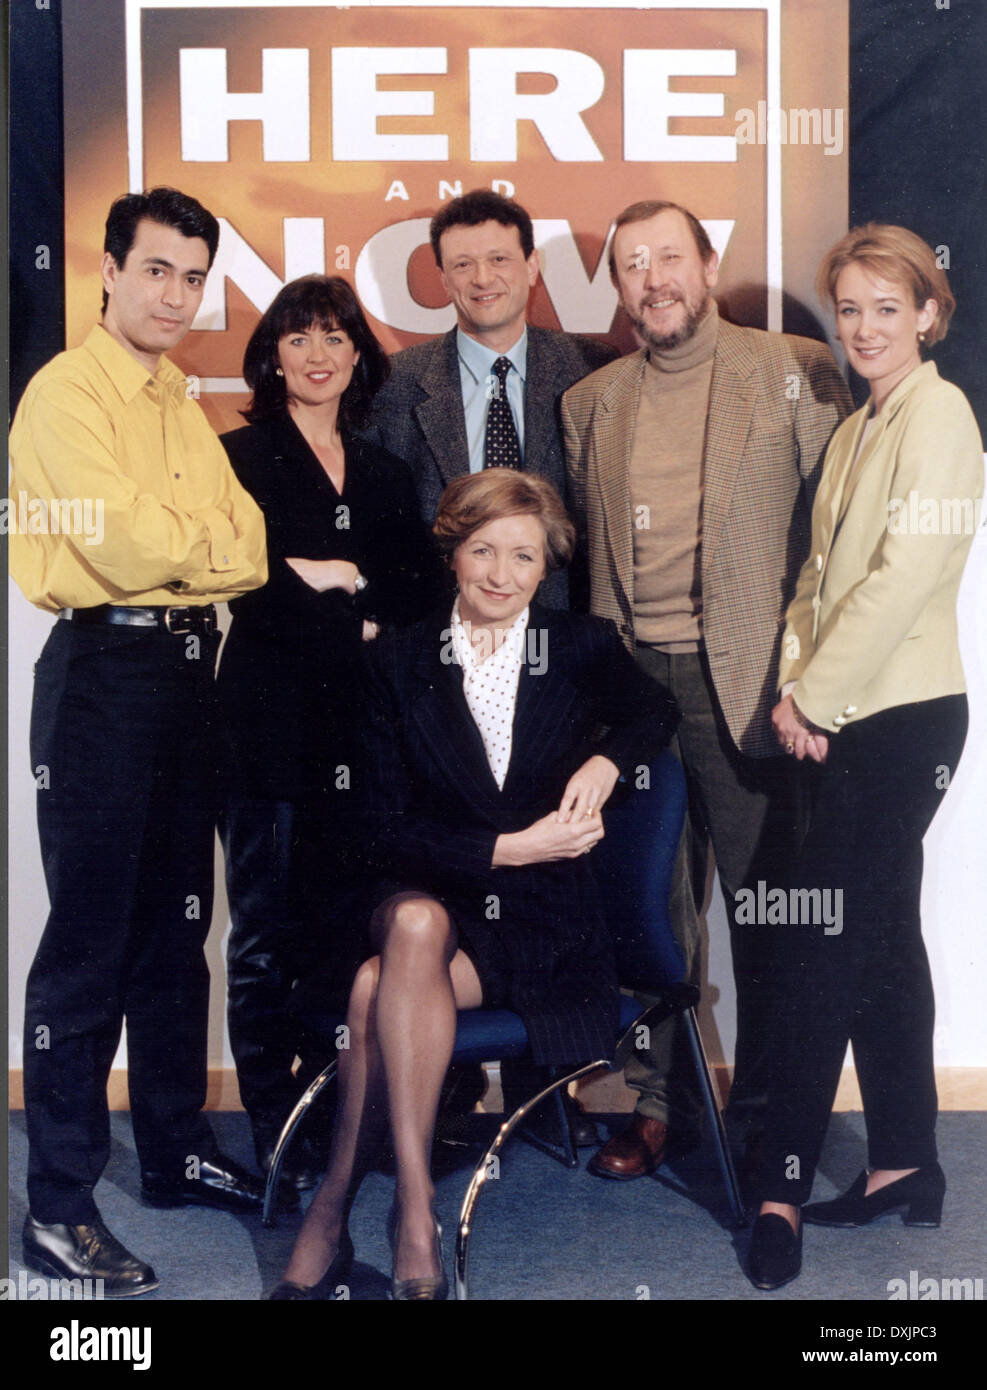 HERE AND NOW (MARCH, 1997) BBC TELEVISION Back row l-r: SANK Stock Photo